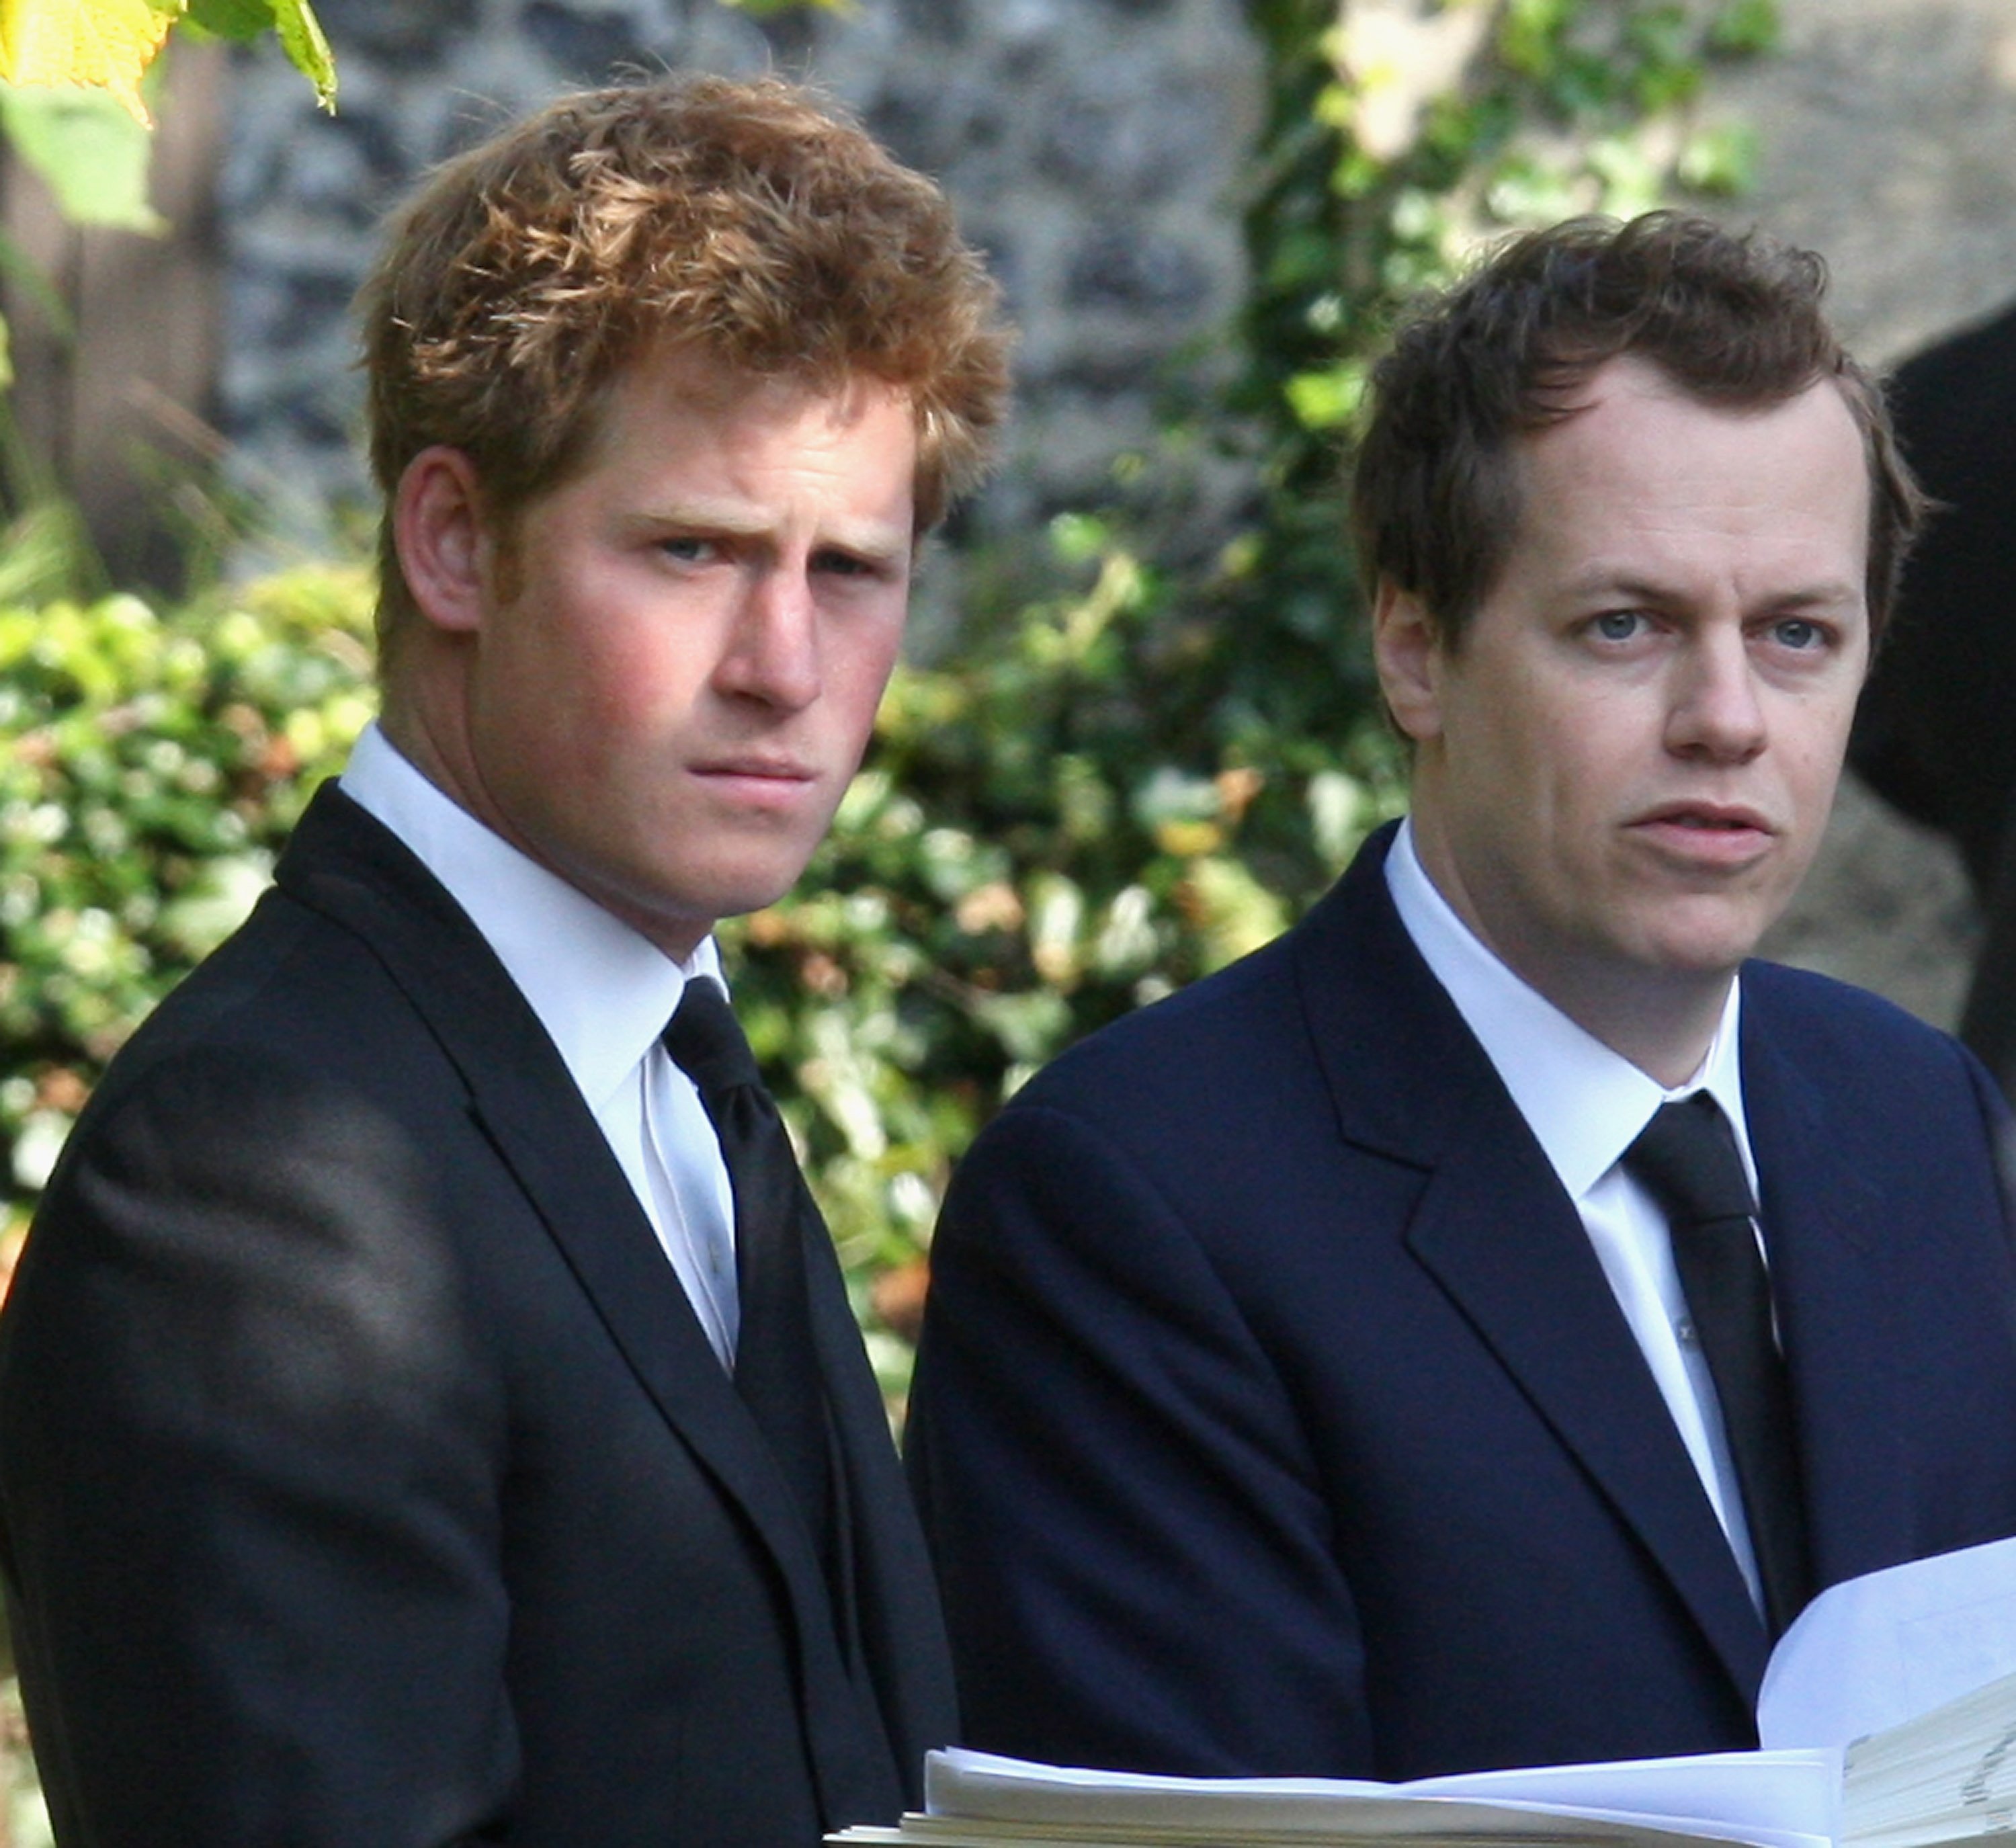 Prince Harry and Tom Parker Bowles next to each other during a Thanksgiving service at St. Mary's Church